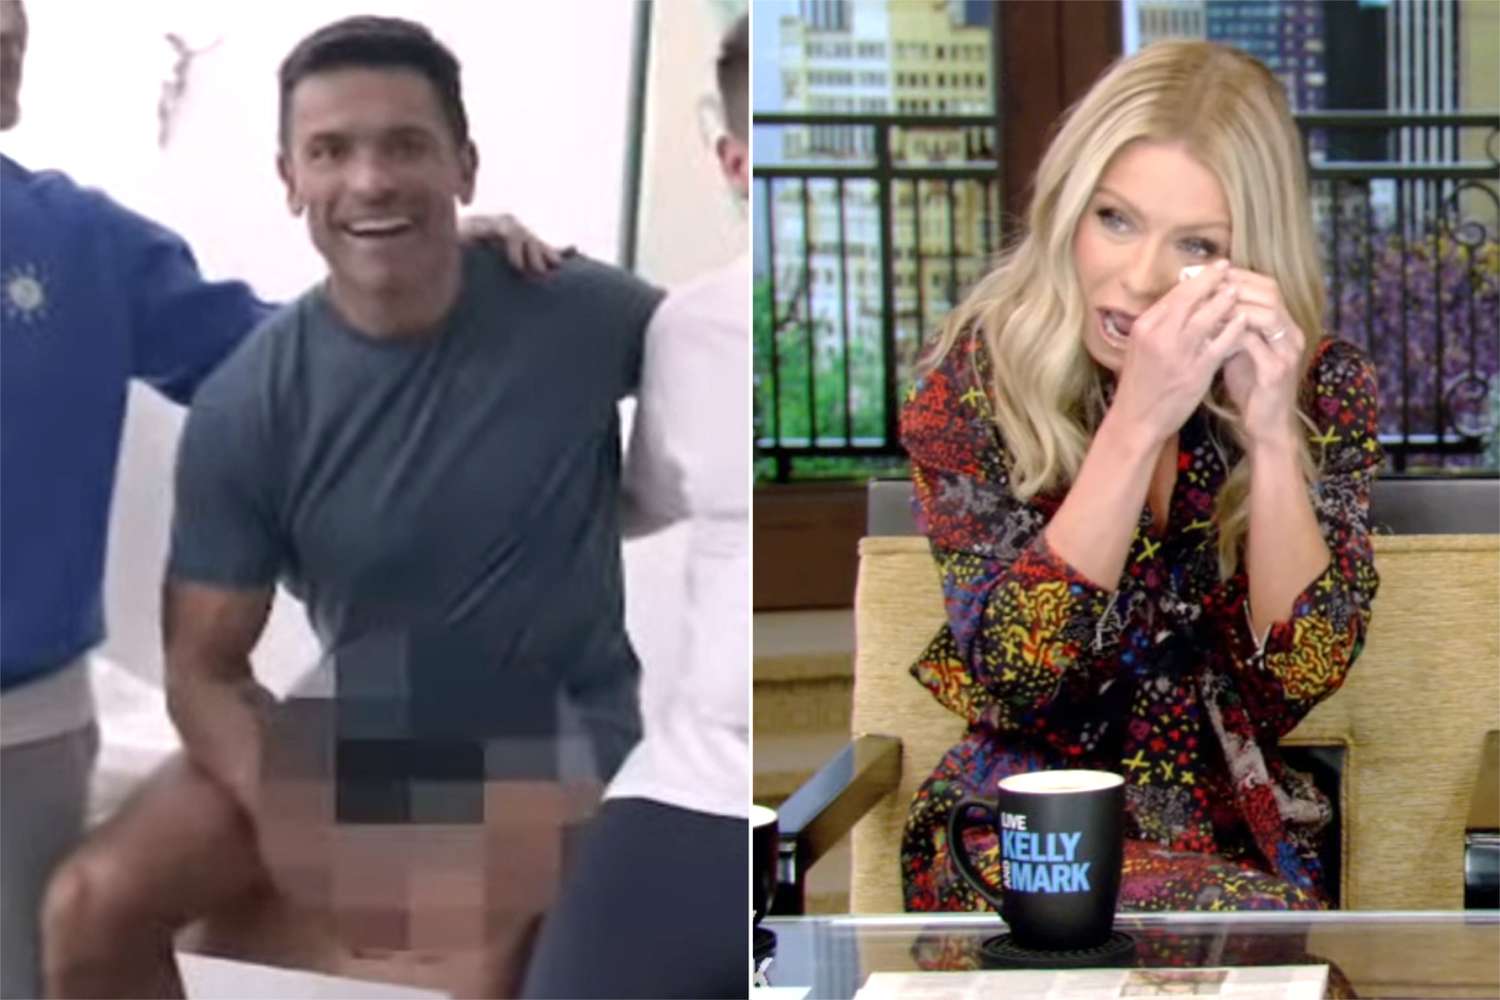 bertrand raousing recommends kelly ripa sex videos pic